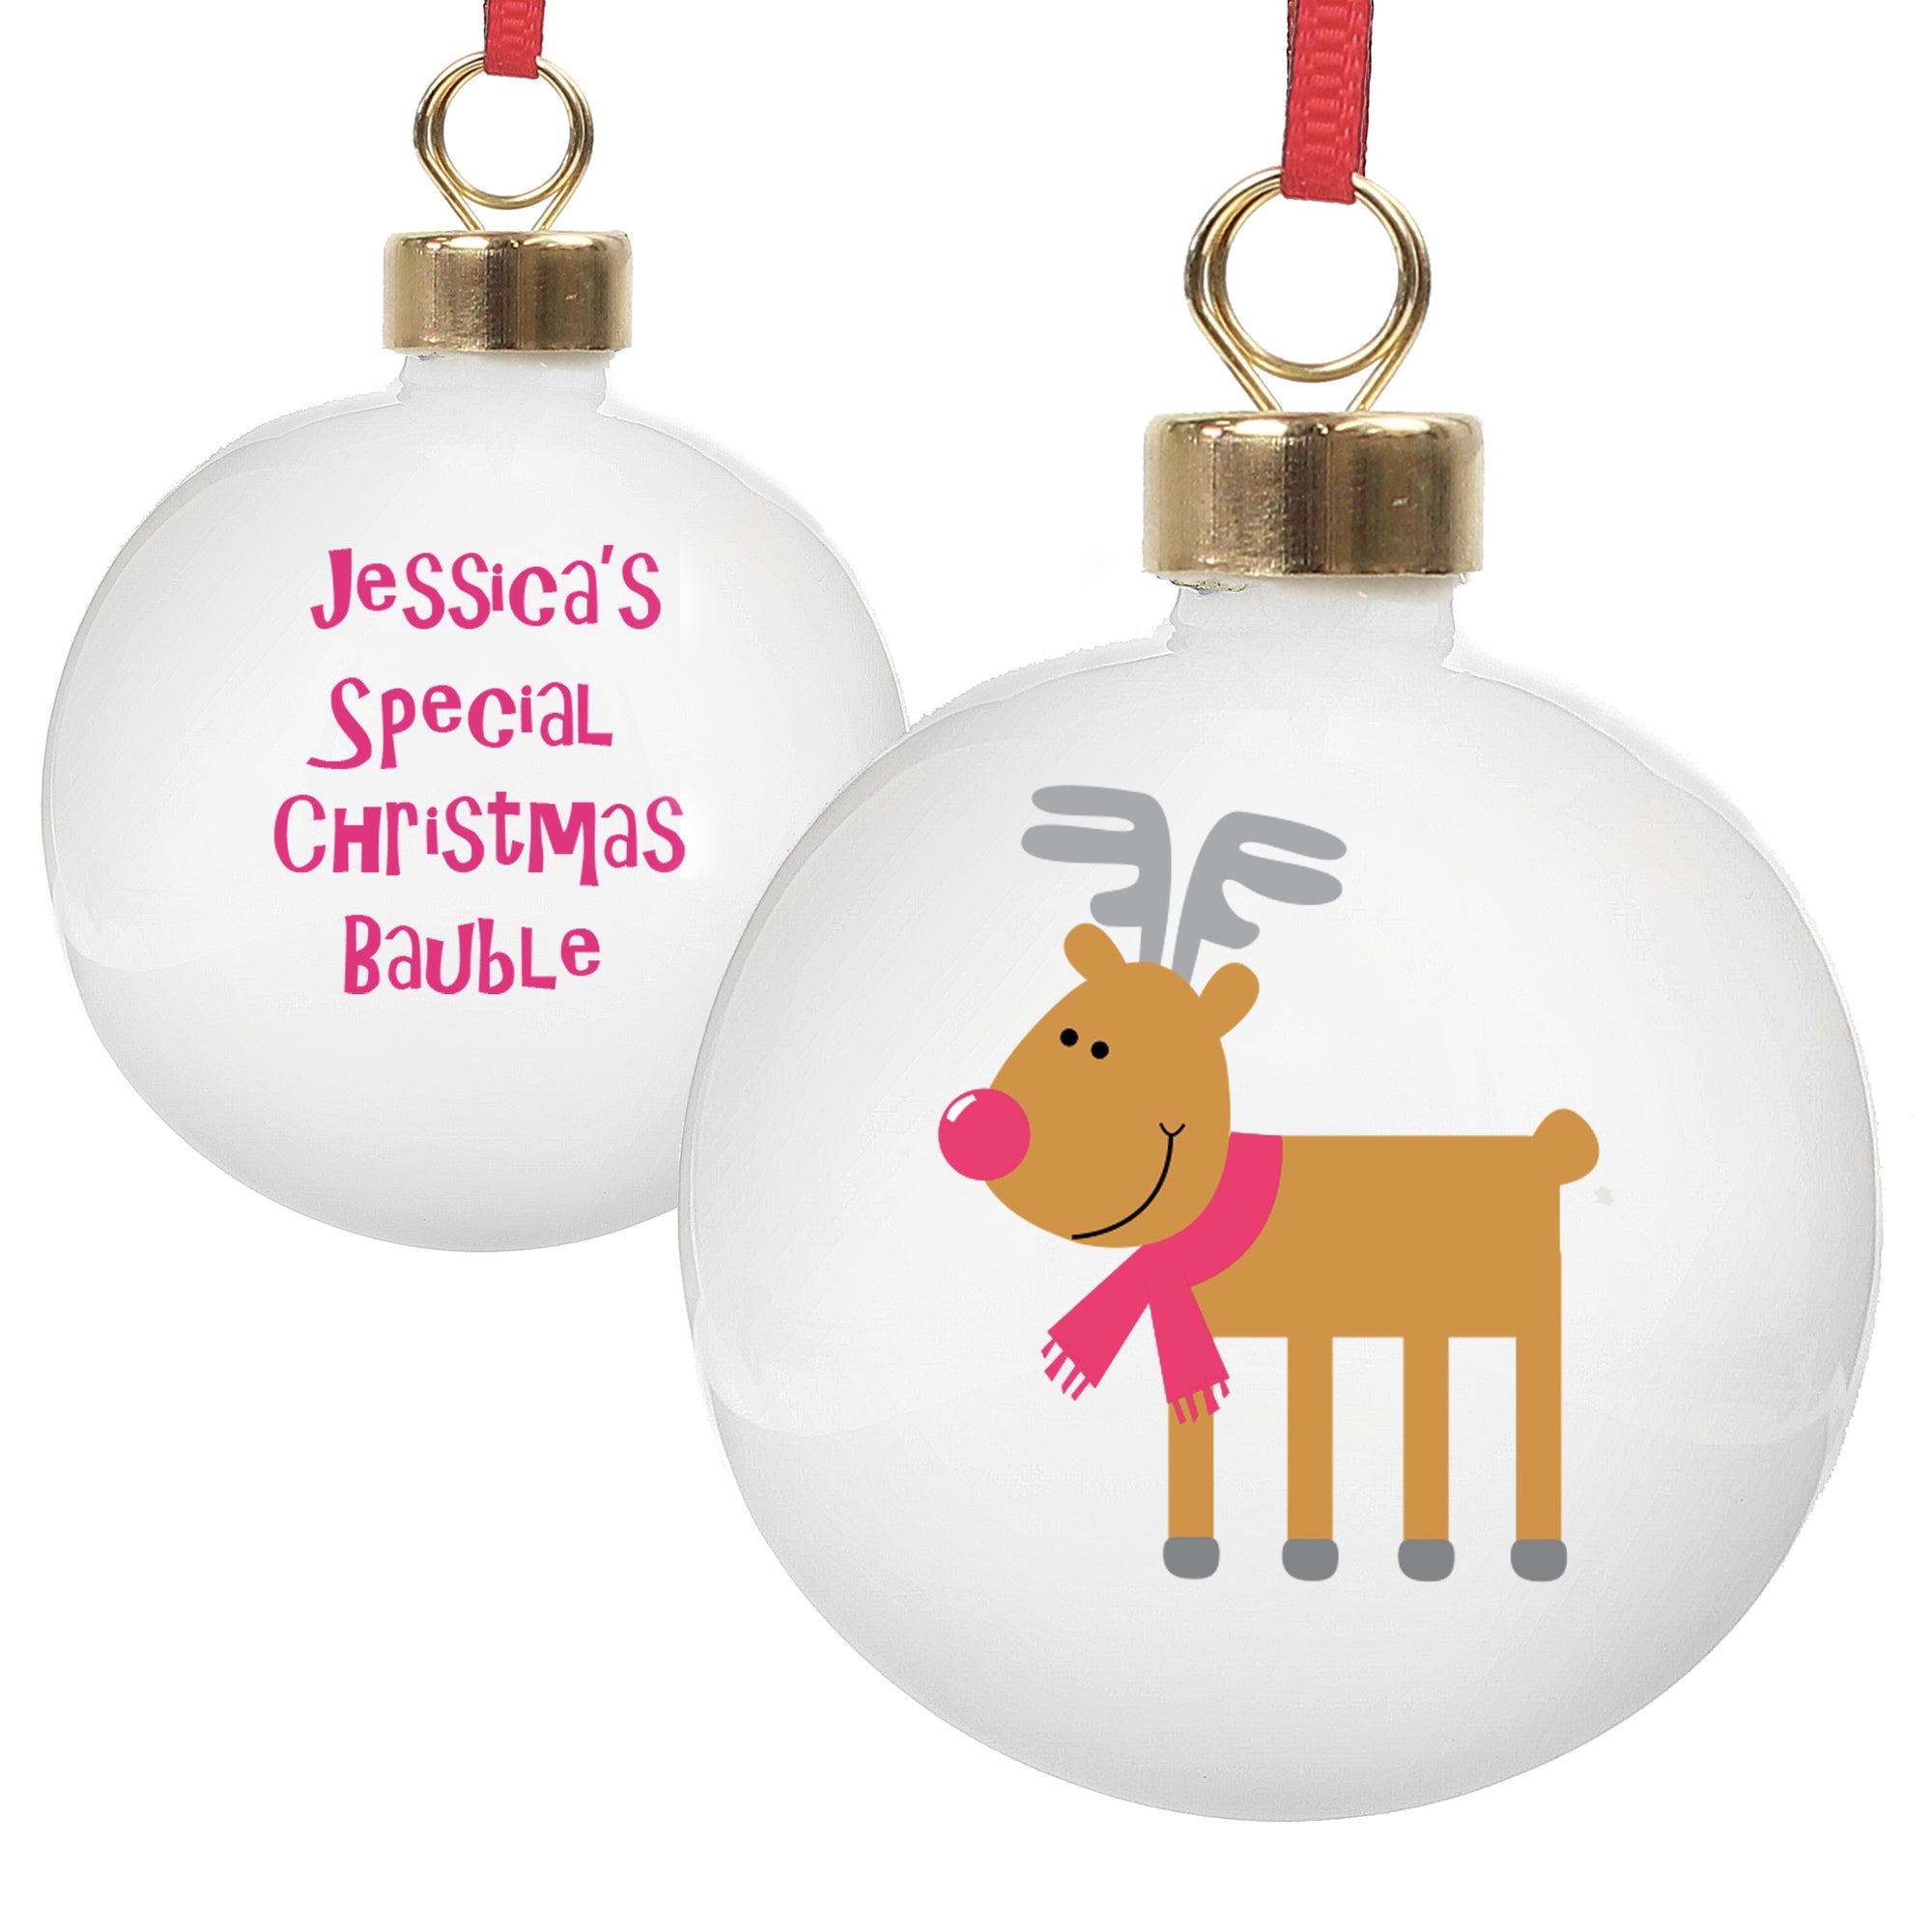 Personalised round Christmas tree bauble featuring a cartoon drawing of Rudolph the Red Nose Reindeer on the front.  Made from white glazed ceramic, the rear of the bauble can be personalised with your own message over 4 lines.